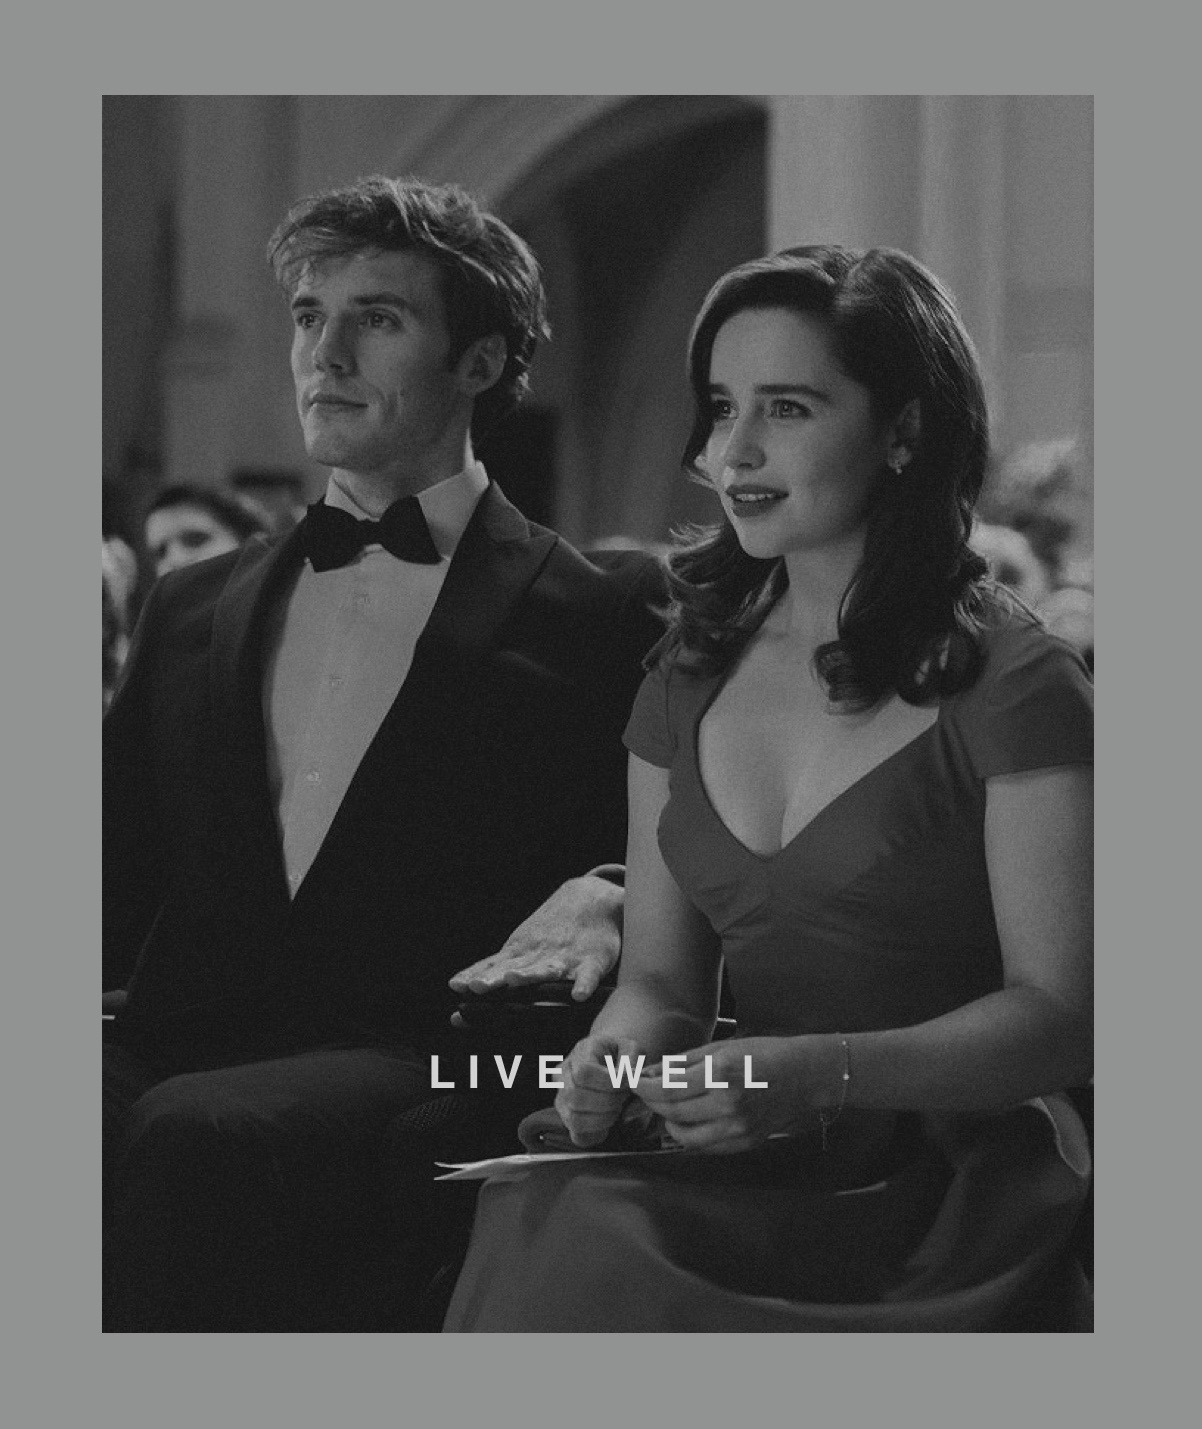 me before you and still me